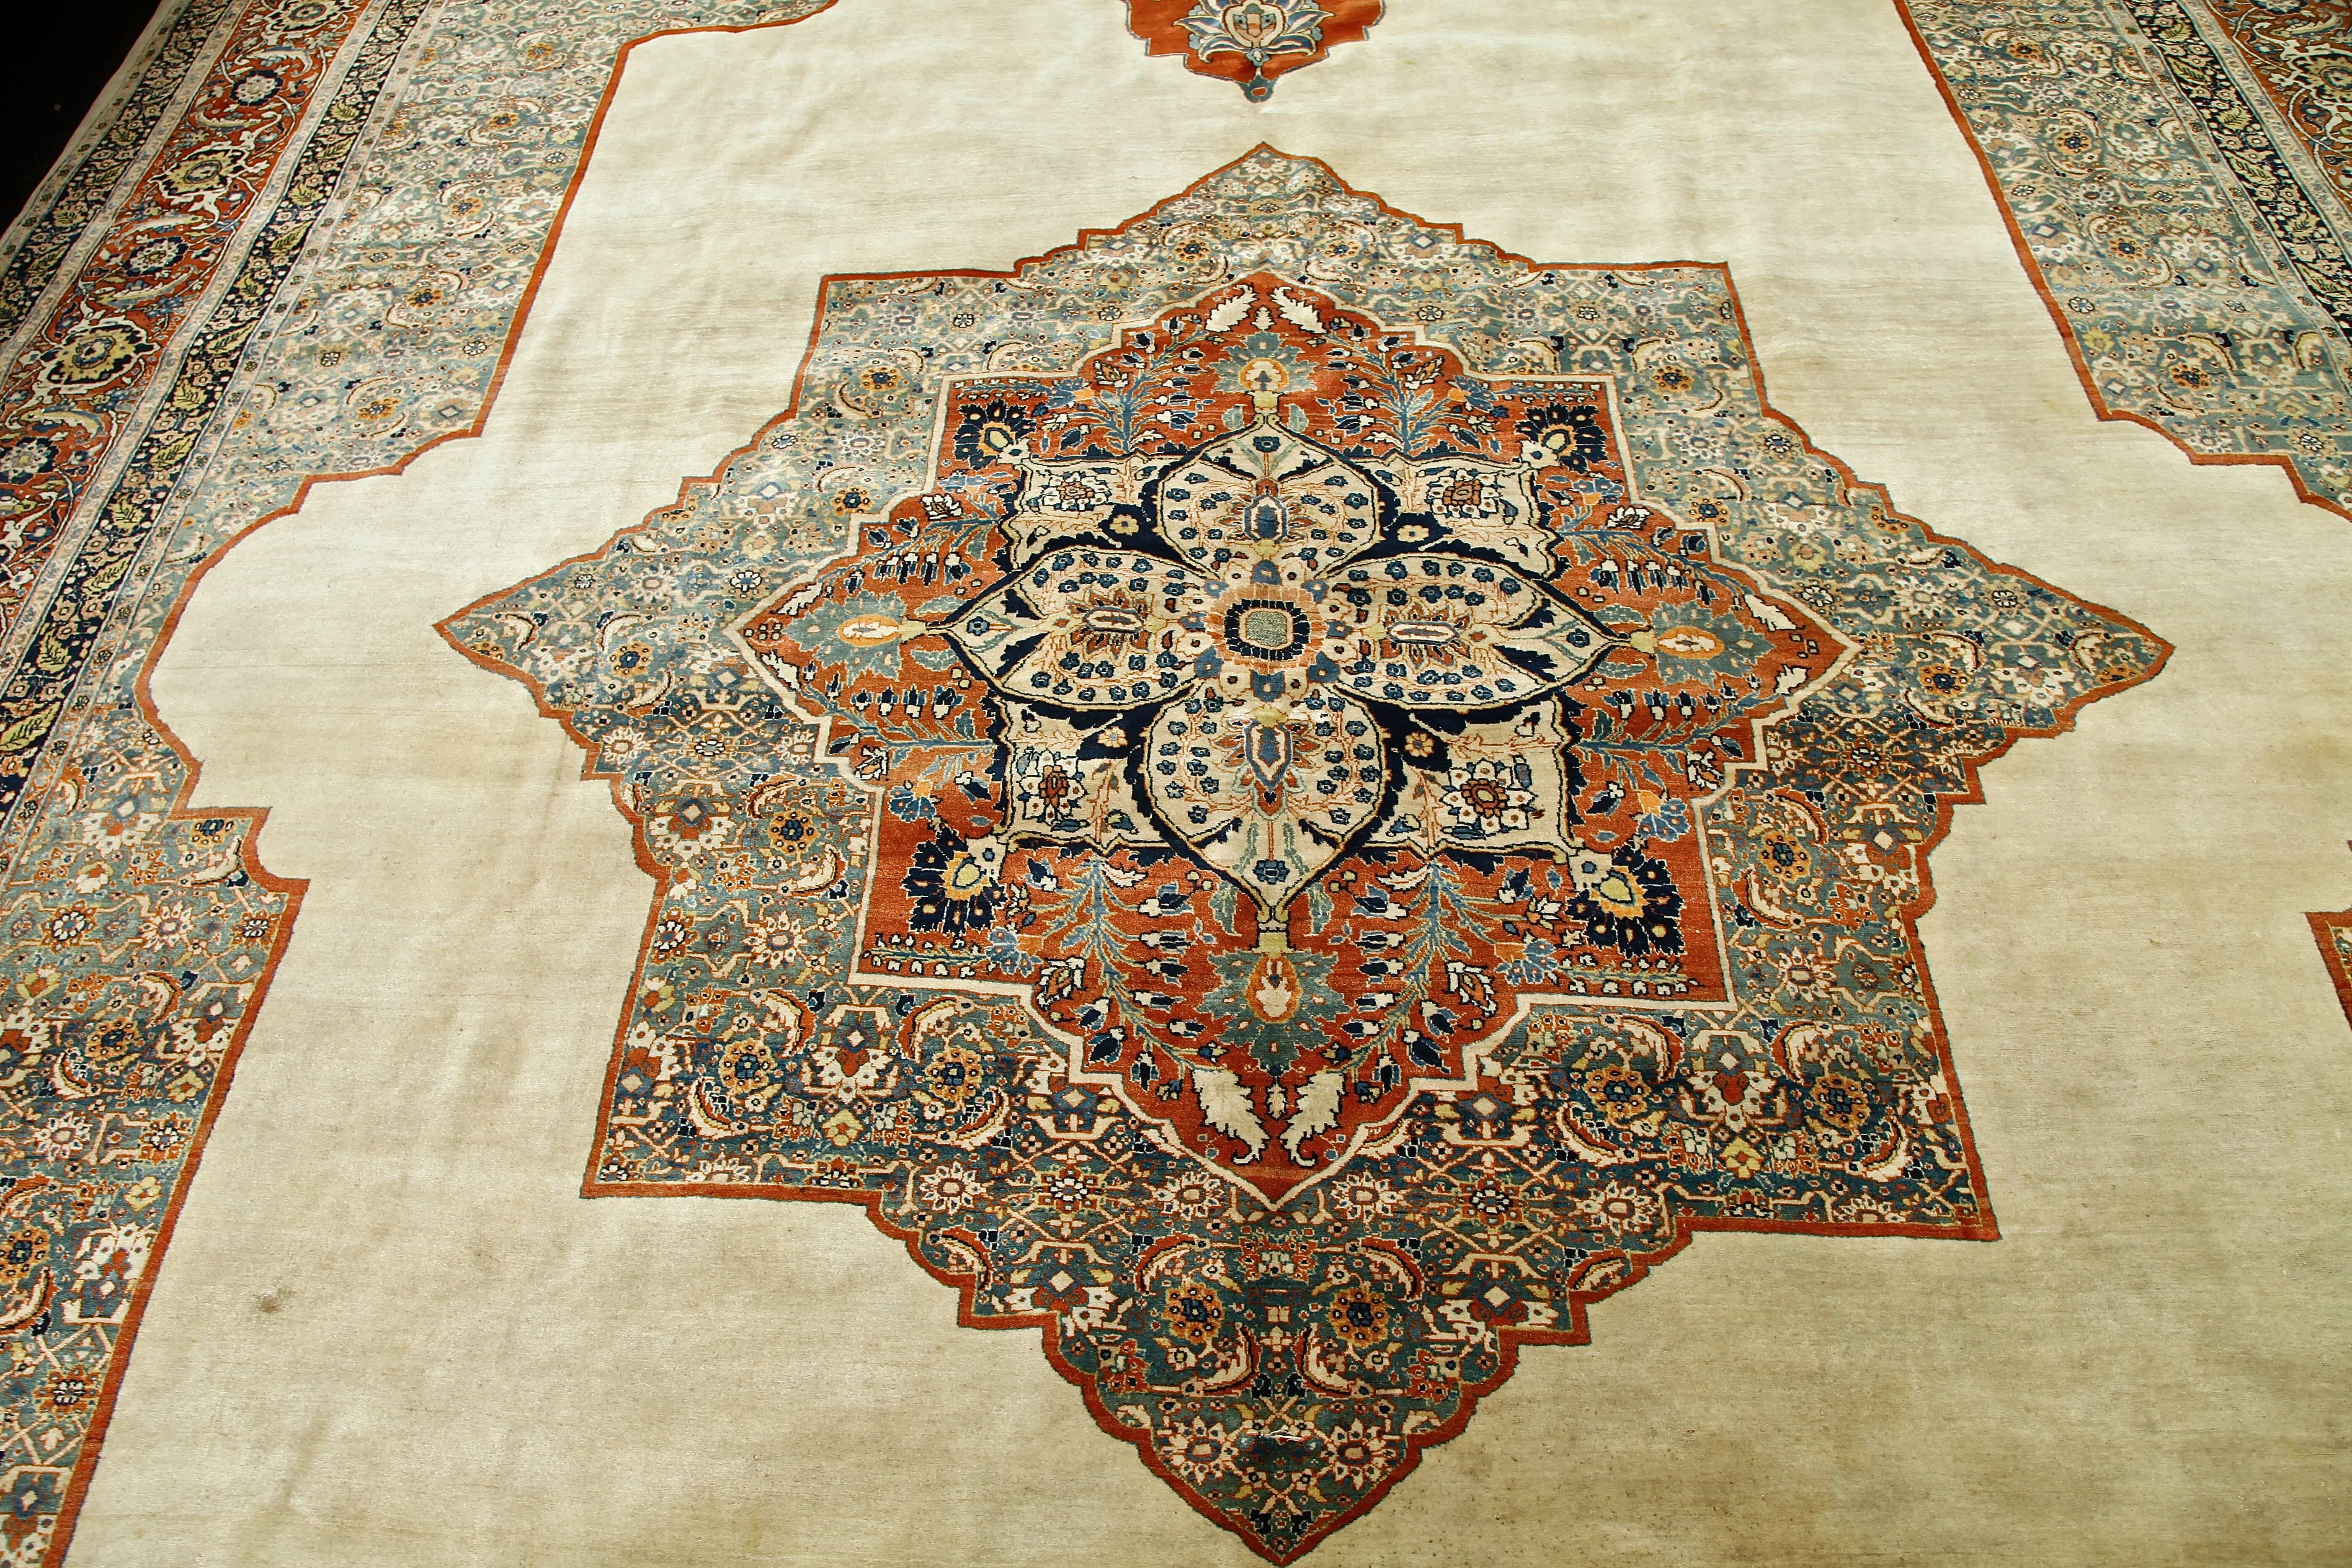 Antique Persian Haji Jalili Carpet, 19th Century In Excellent Condition For Sale In London, GB